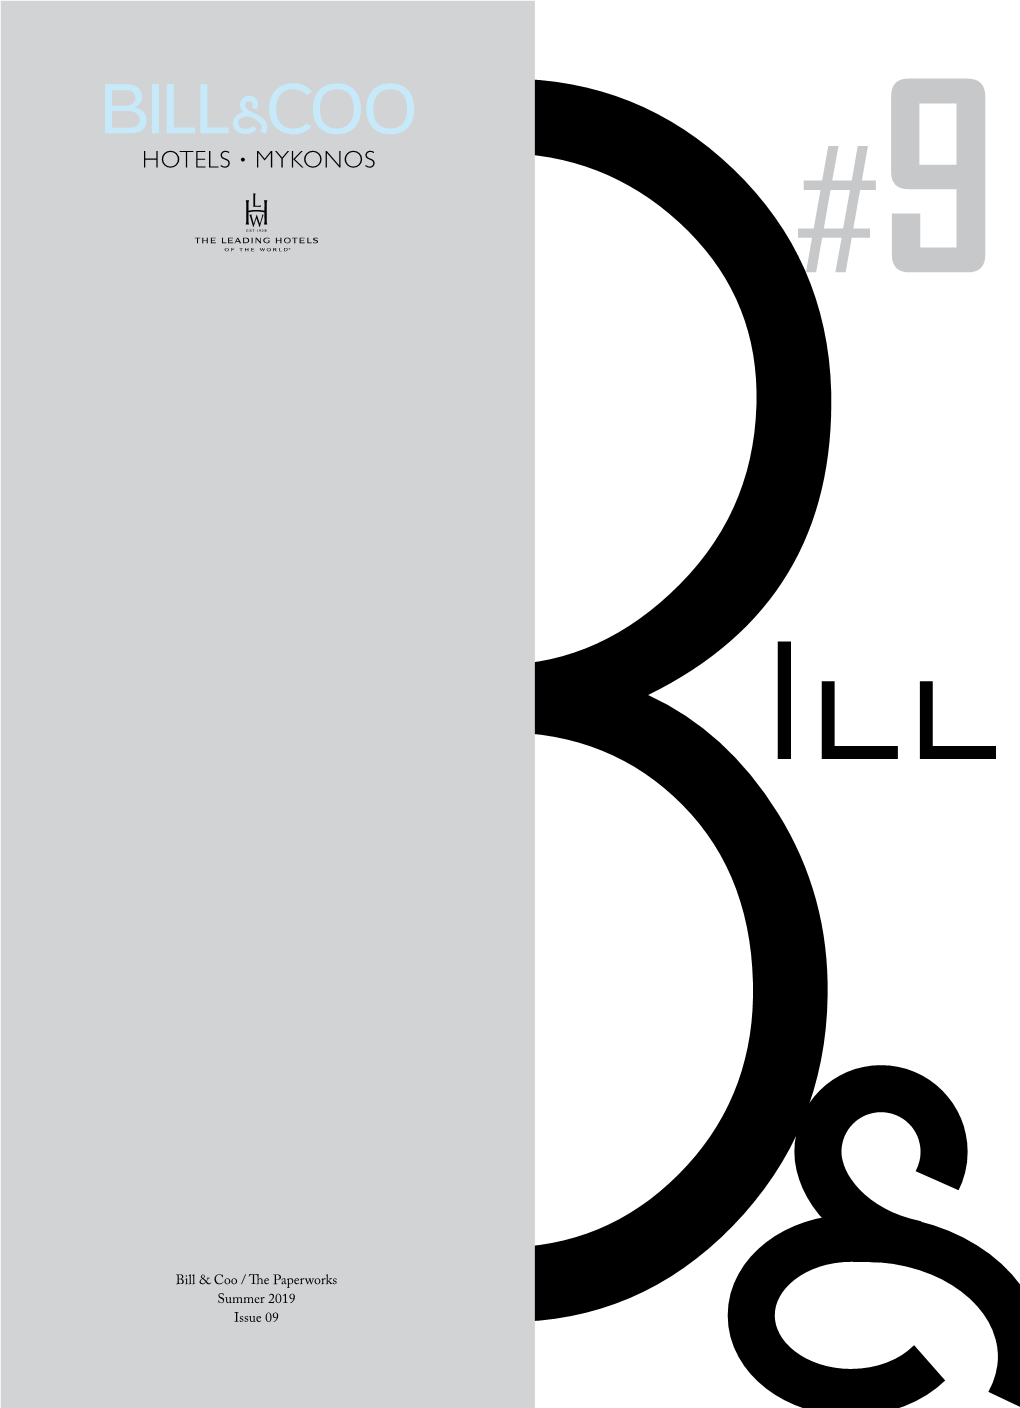 PAPERWORKS Issue 09 Summer 2019 Te Paperworks Bill & Coo / Welcome to the #Billandcoowayoflife